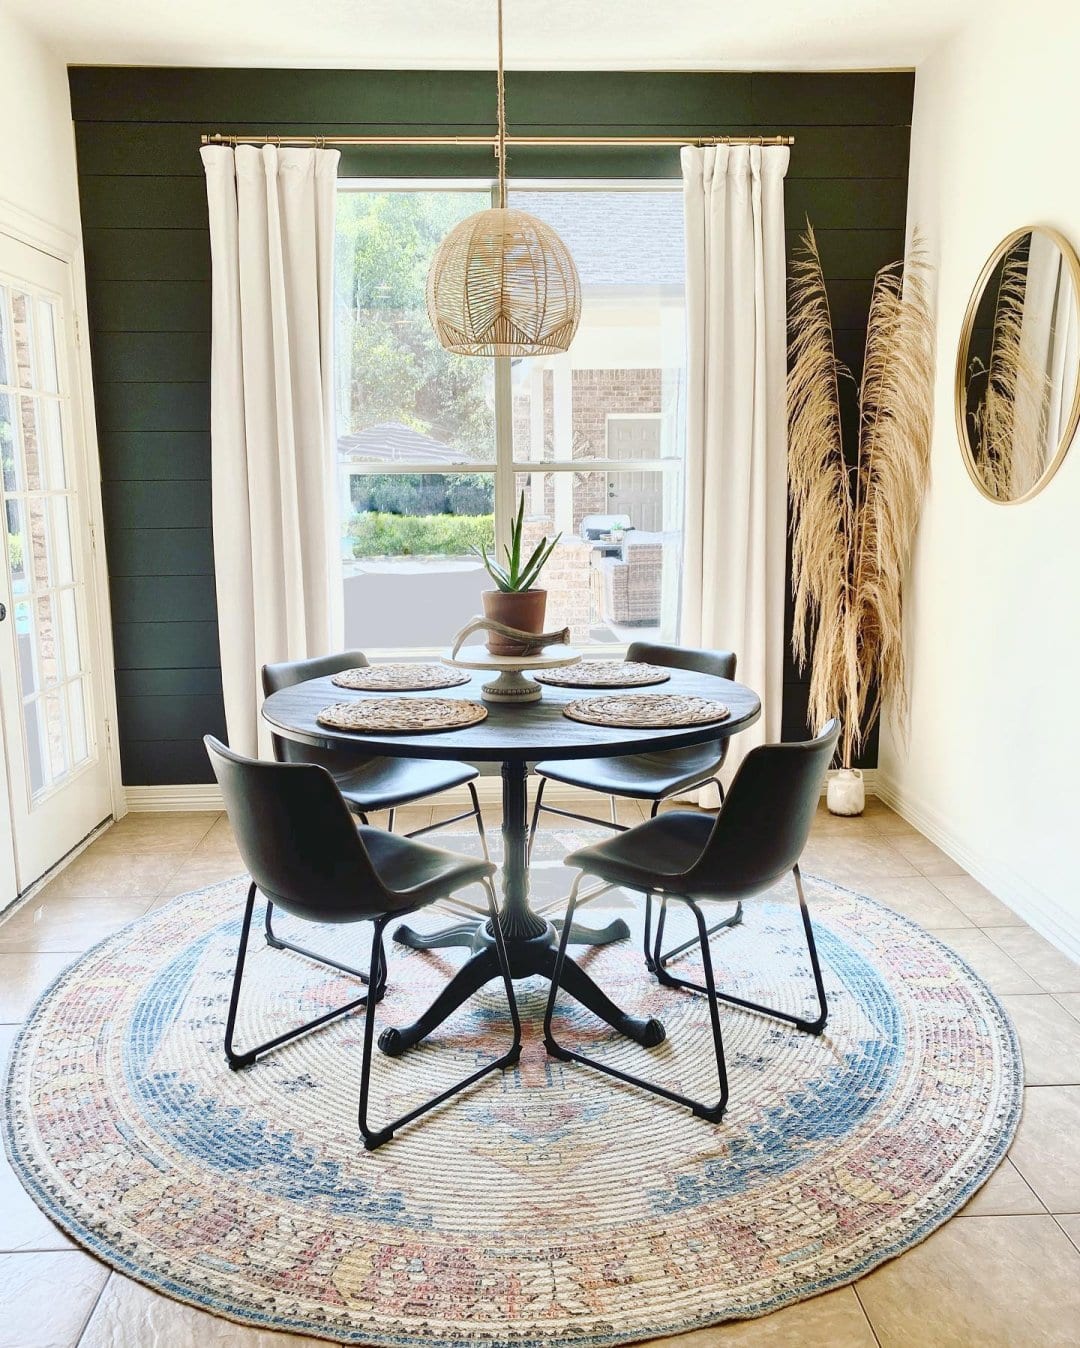 How To Decorate A Round Dining Table, Round Dining Table Set Ups